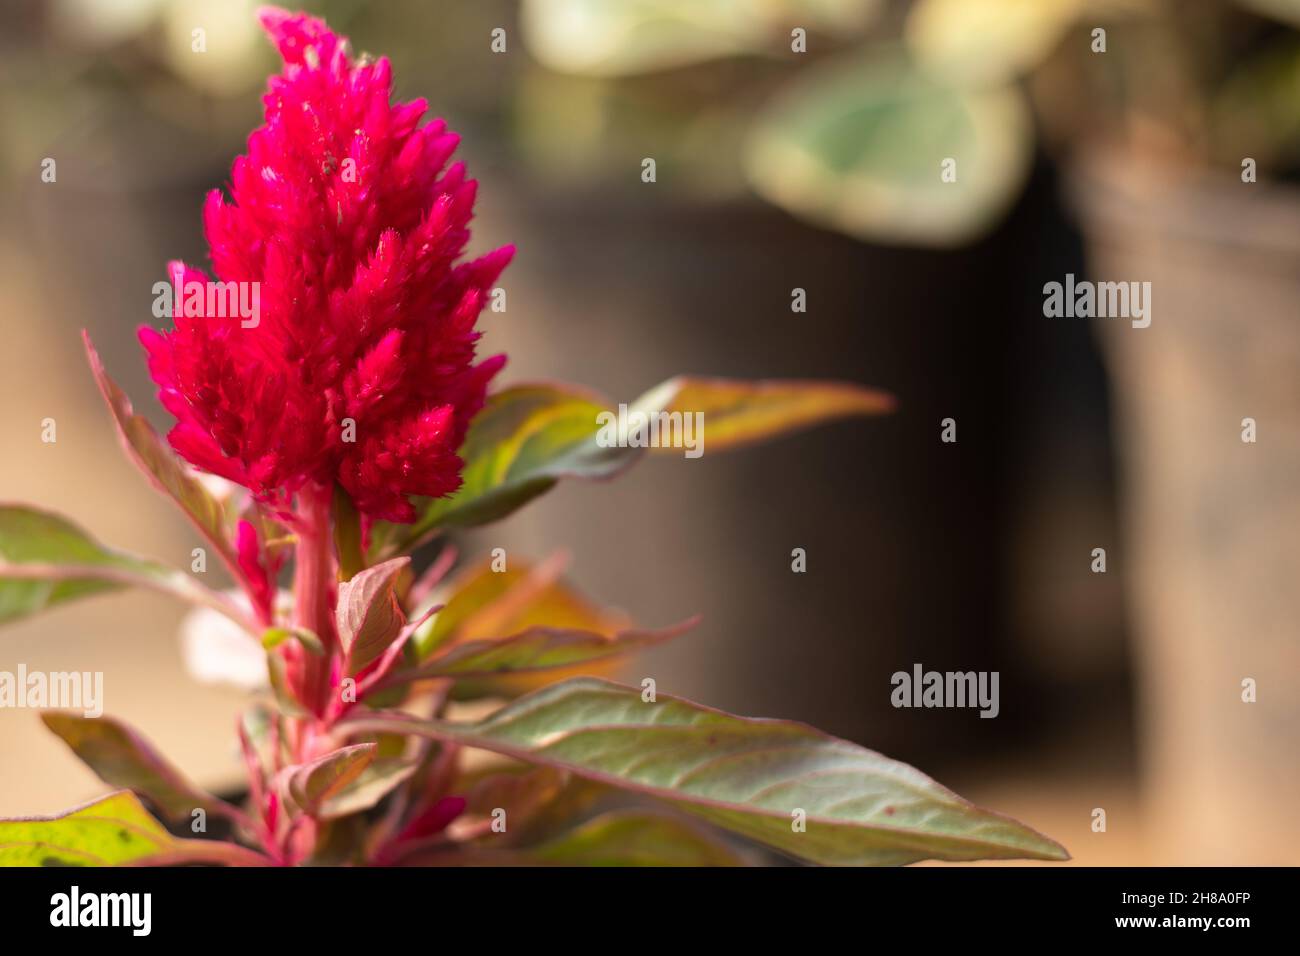 Selective Focus On Plumed Red Argentea Celosia Plumosa Flower Also Known As Chinese Wool, Amaranthus, Amarnath Wool, Indian Murga Phool On Colorful Fl Stock Photo